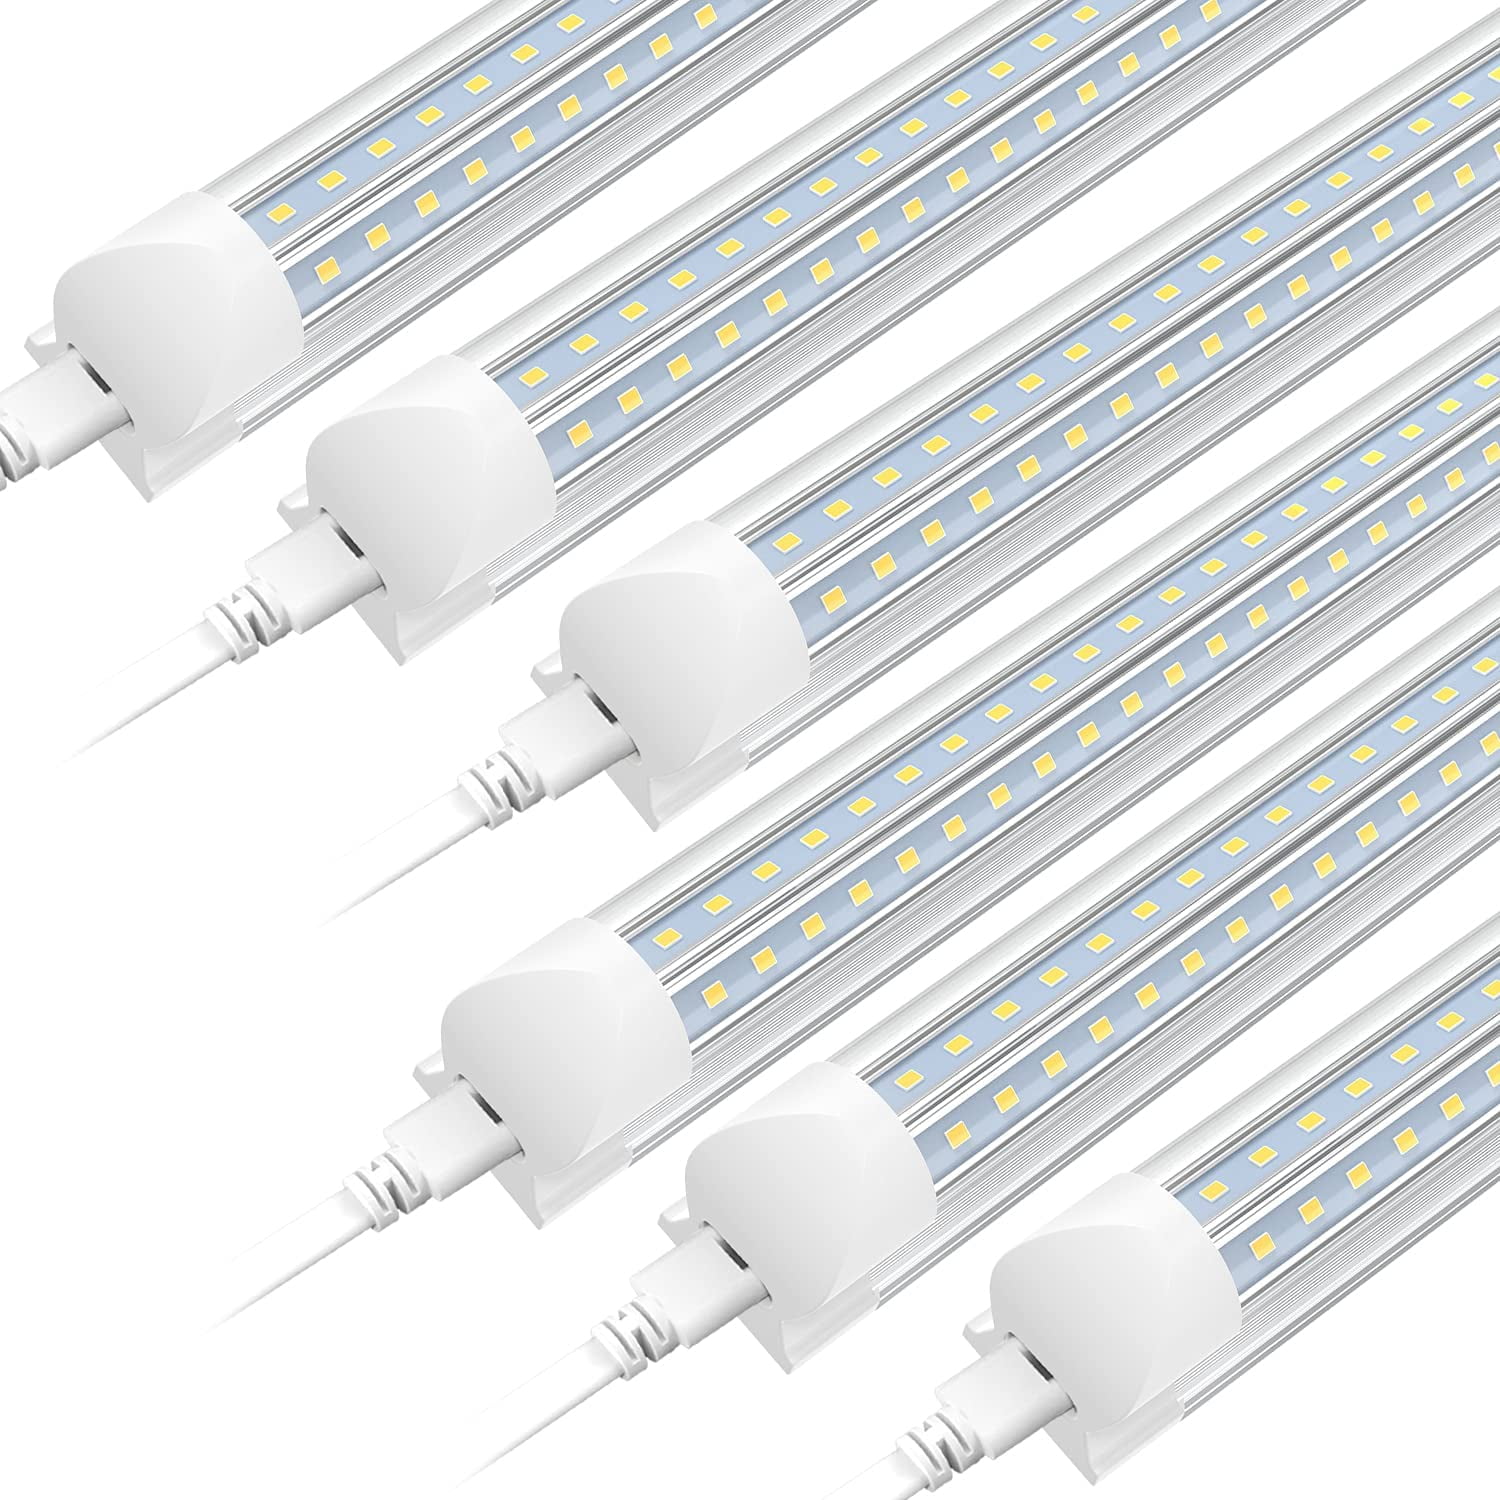 4ft 1.2m 18w T8 LED Tube 6000K 6500K Replace 40W Fluorescent Fixture 10-100PACK 